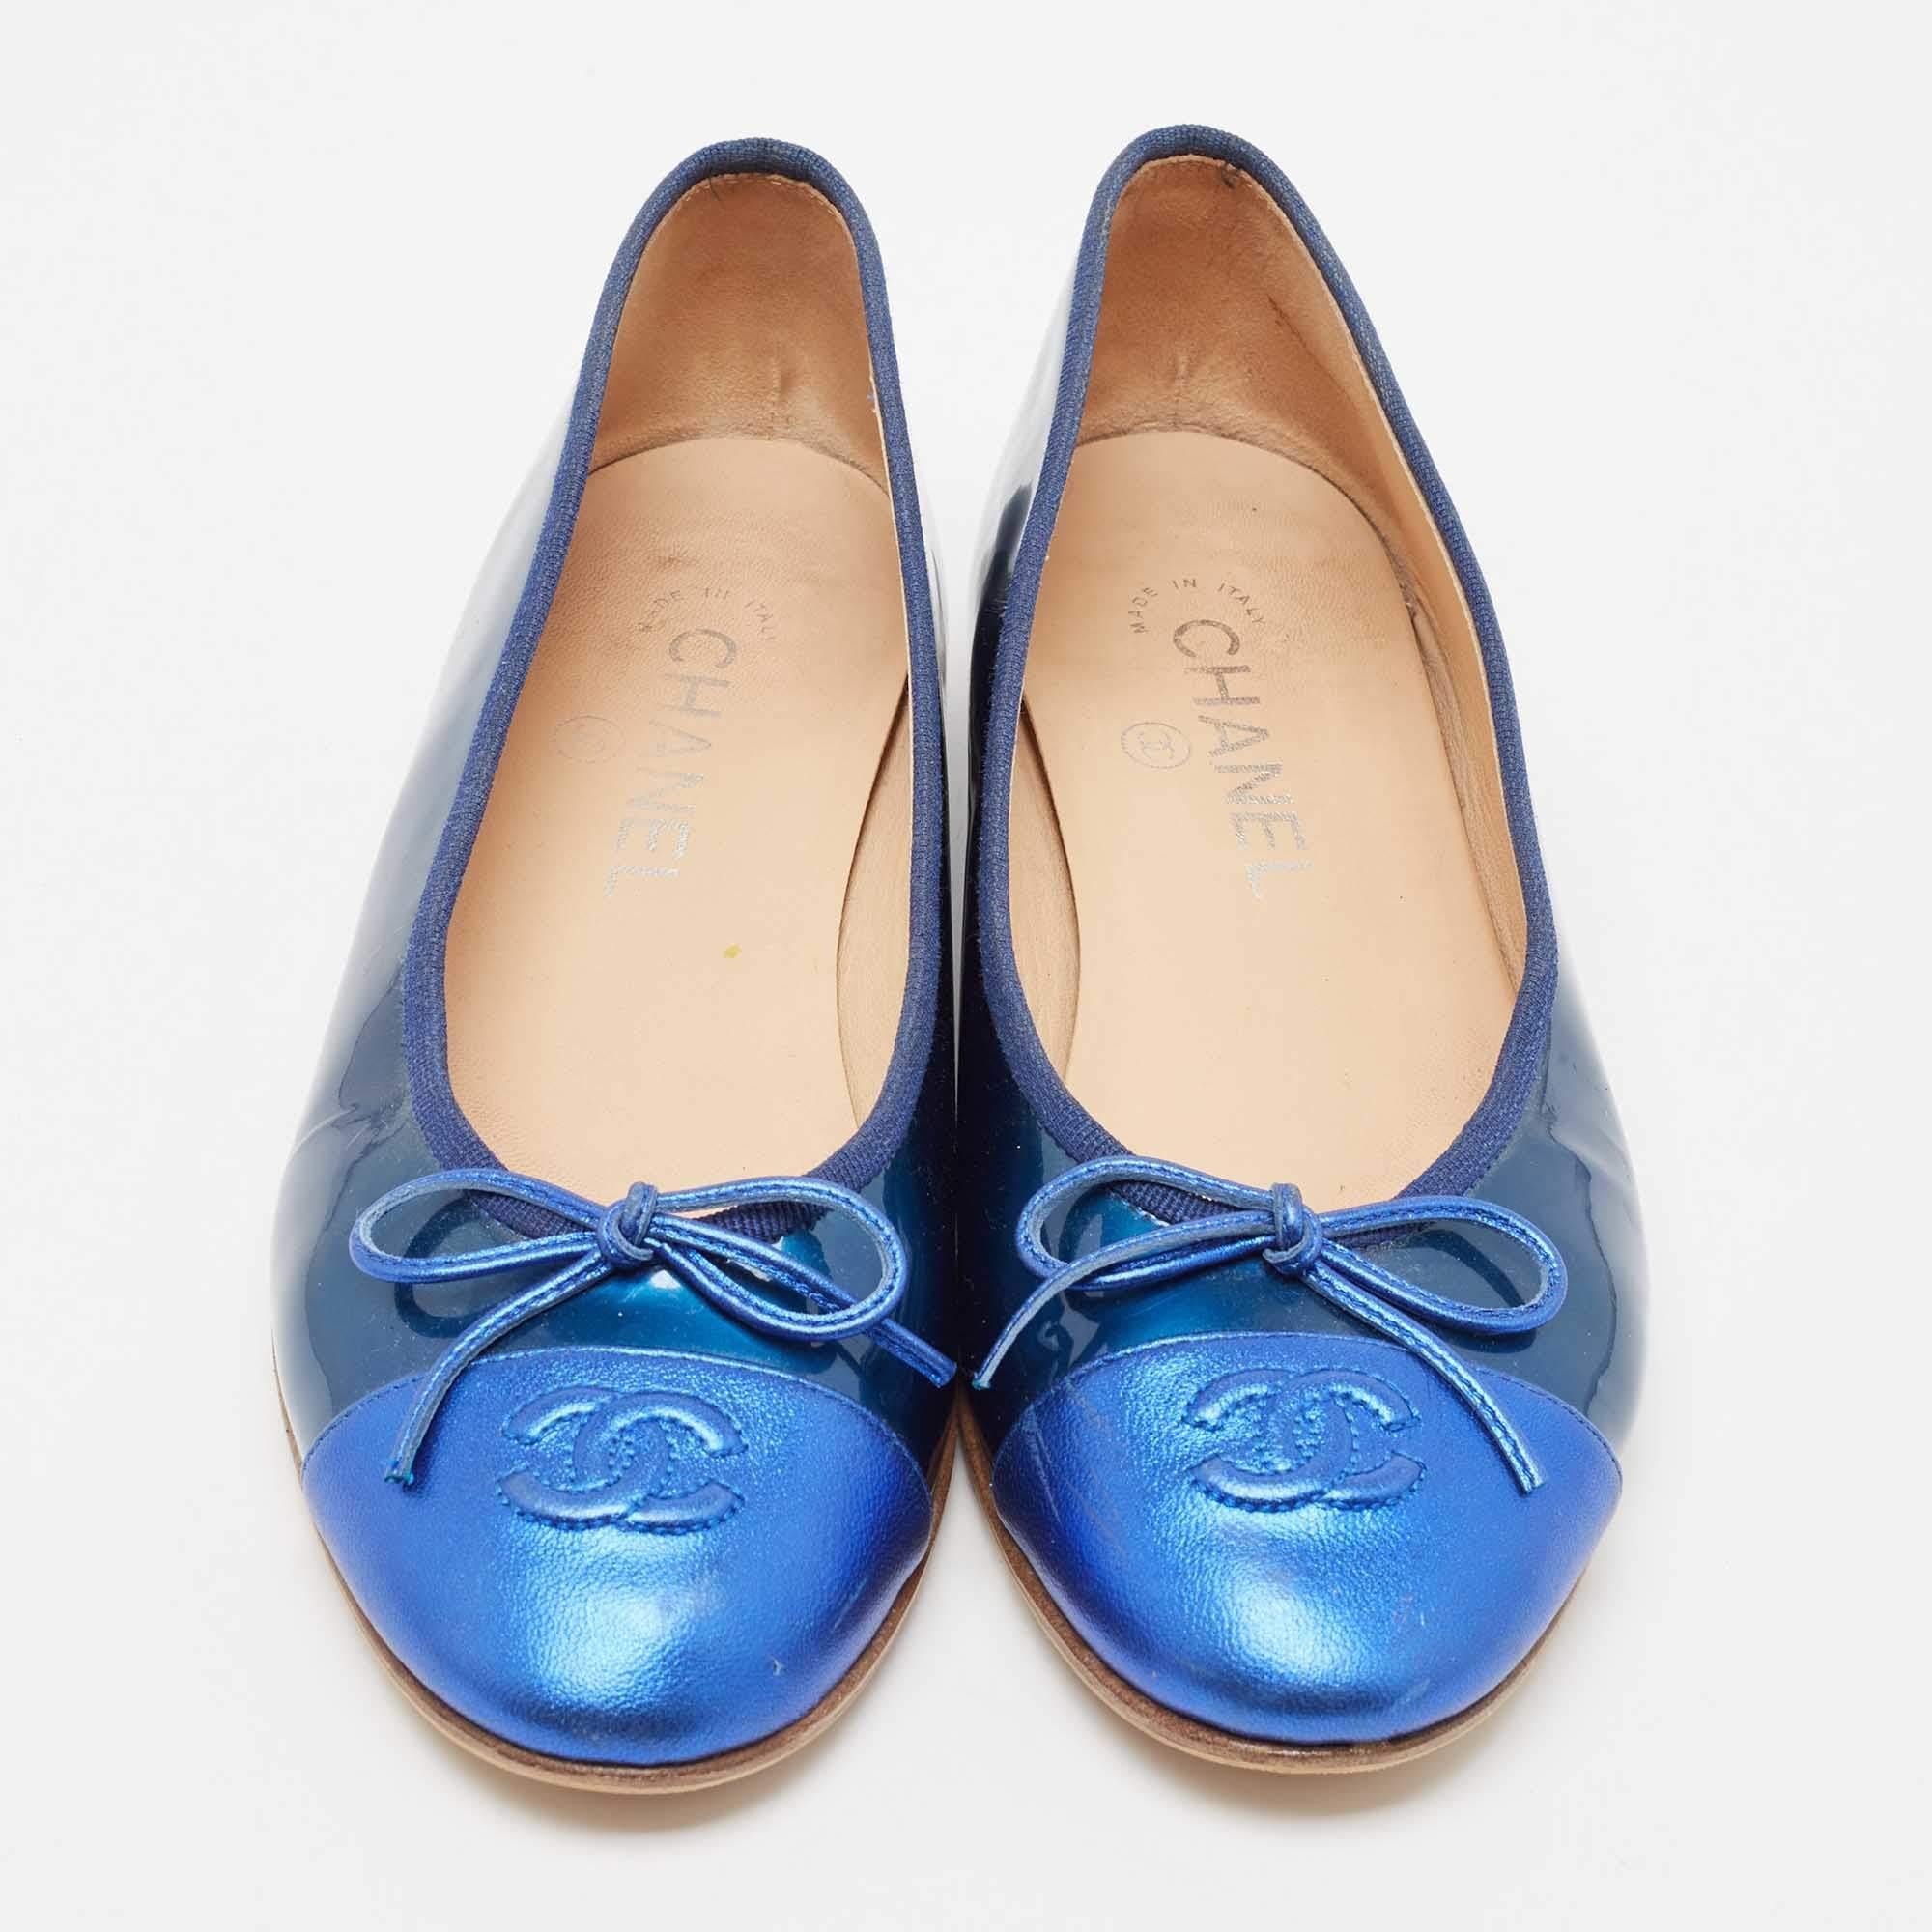 Defined by comfort and effortless style, no wardrobe is ever complete without a pair of chic ballet flats. This pair is lovely to look at and is equipped with elements like a comfortable insole and a durable sole.

